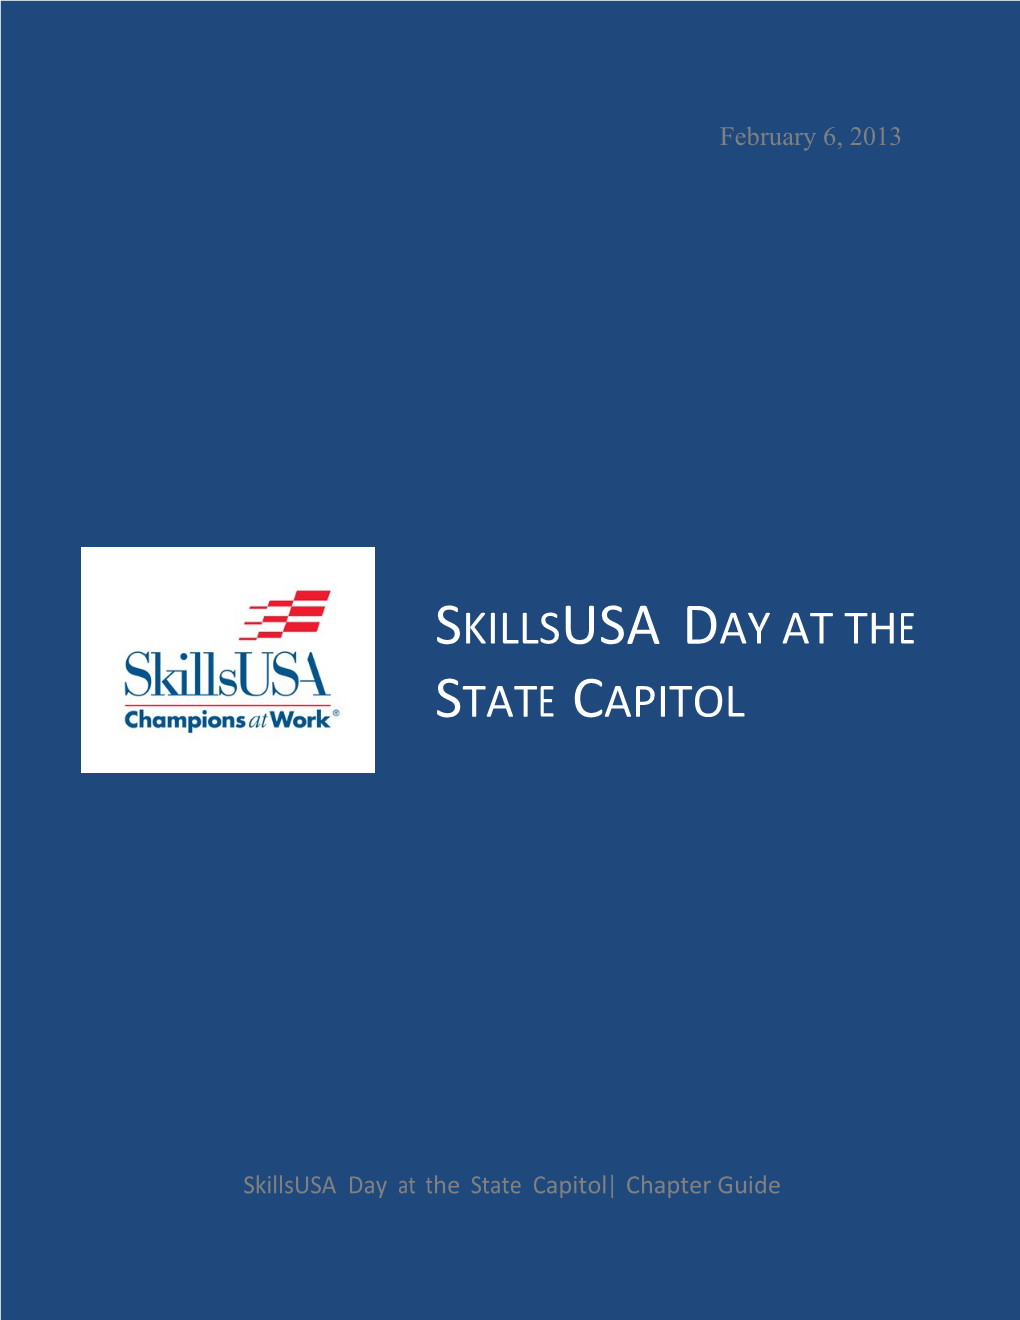 Skillsusa Day at the State Capitol